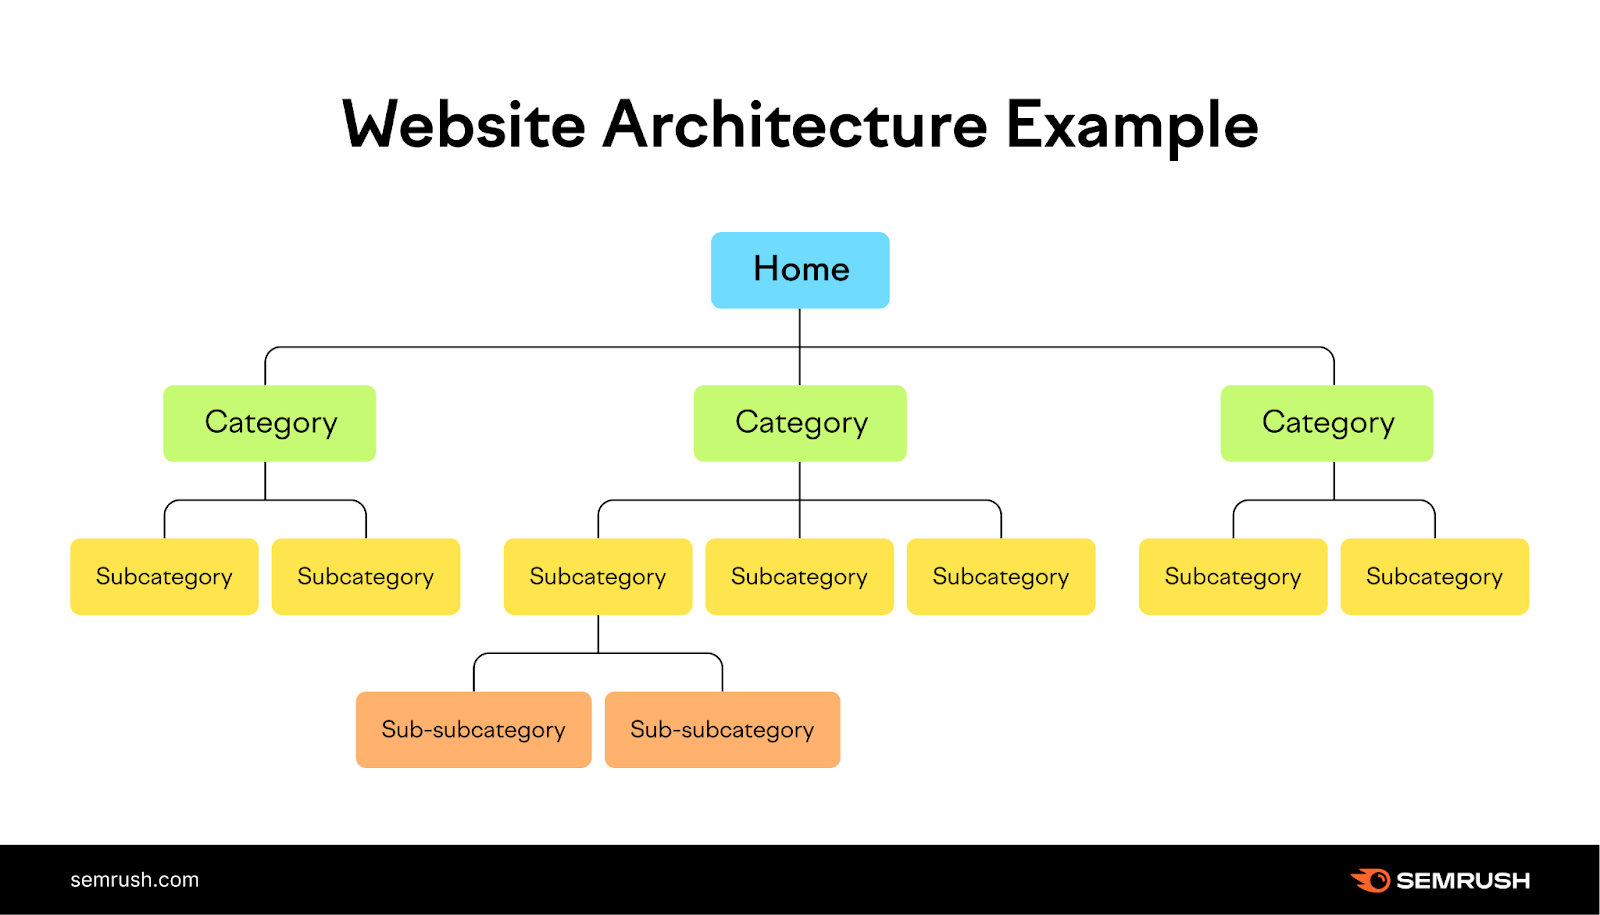 A visual example of website architecture